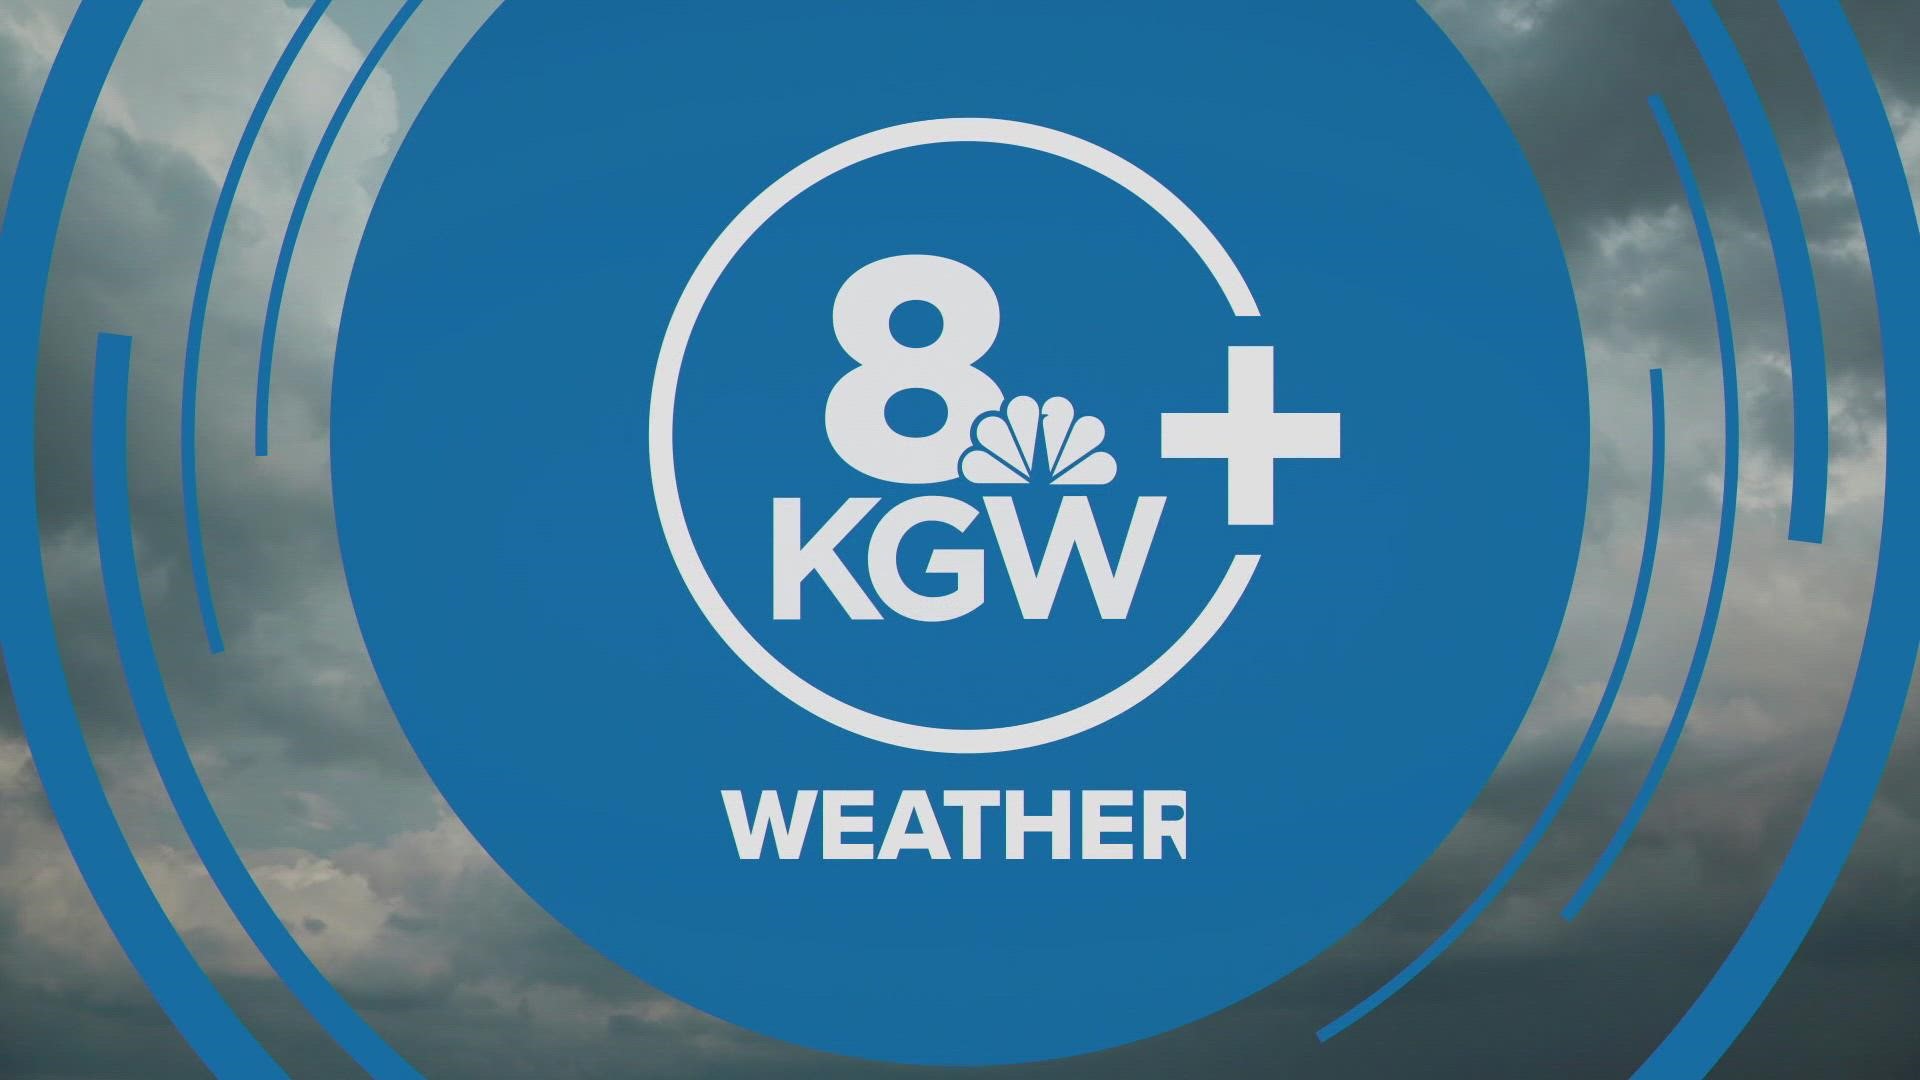 KGW meteorologist Rod Hill with the KGW+ weather report for the Portland, Oregon area for Monday, Jan. 16, 2023.